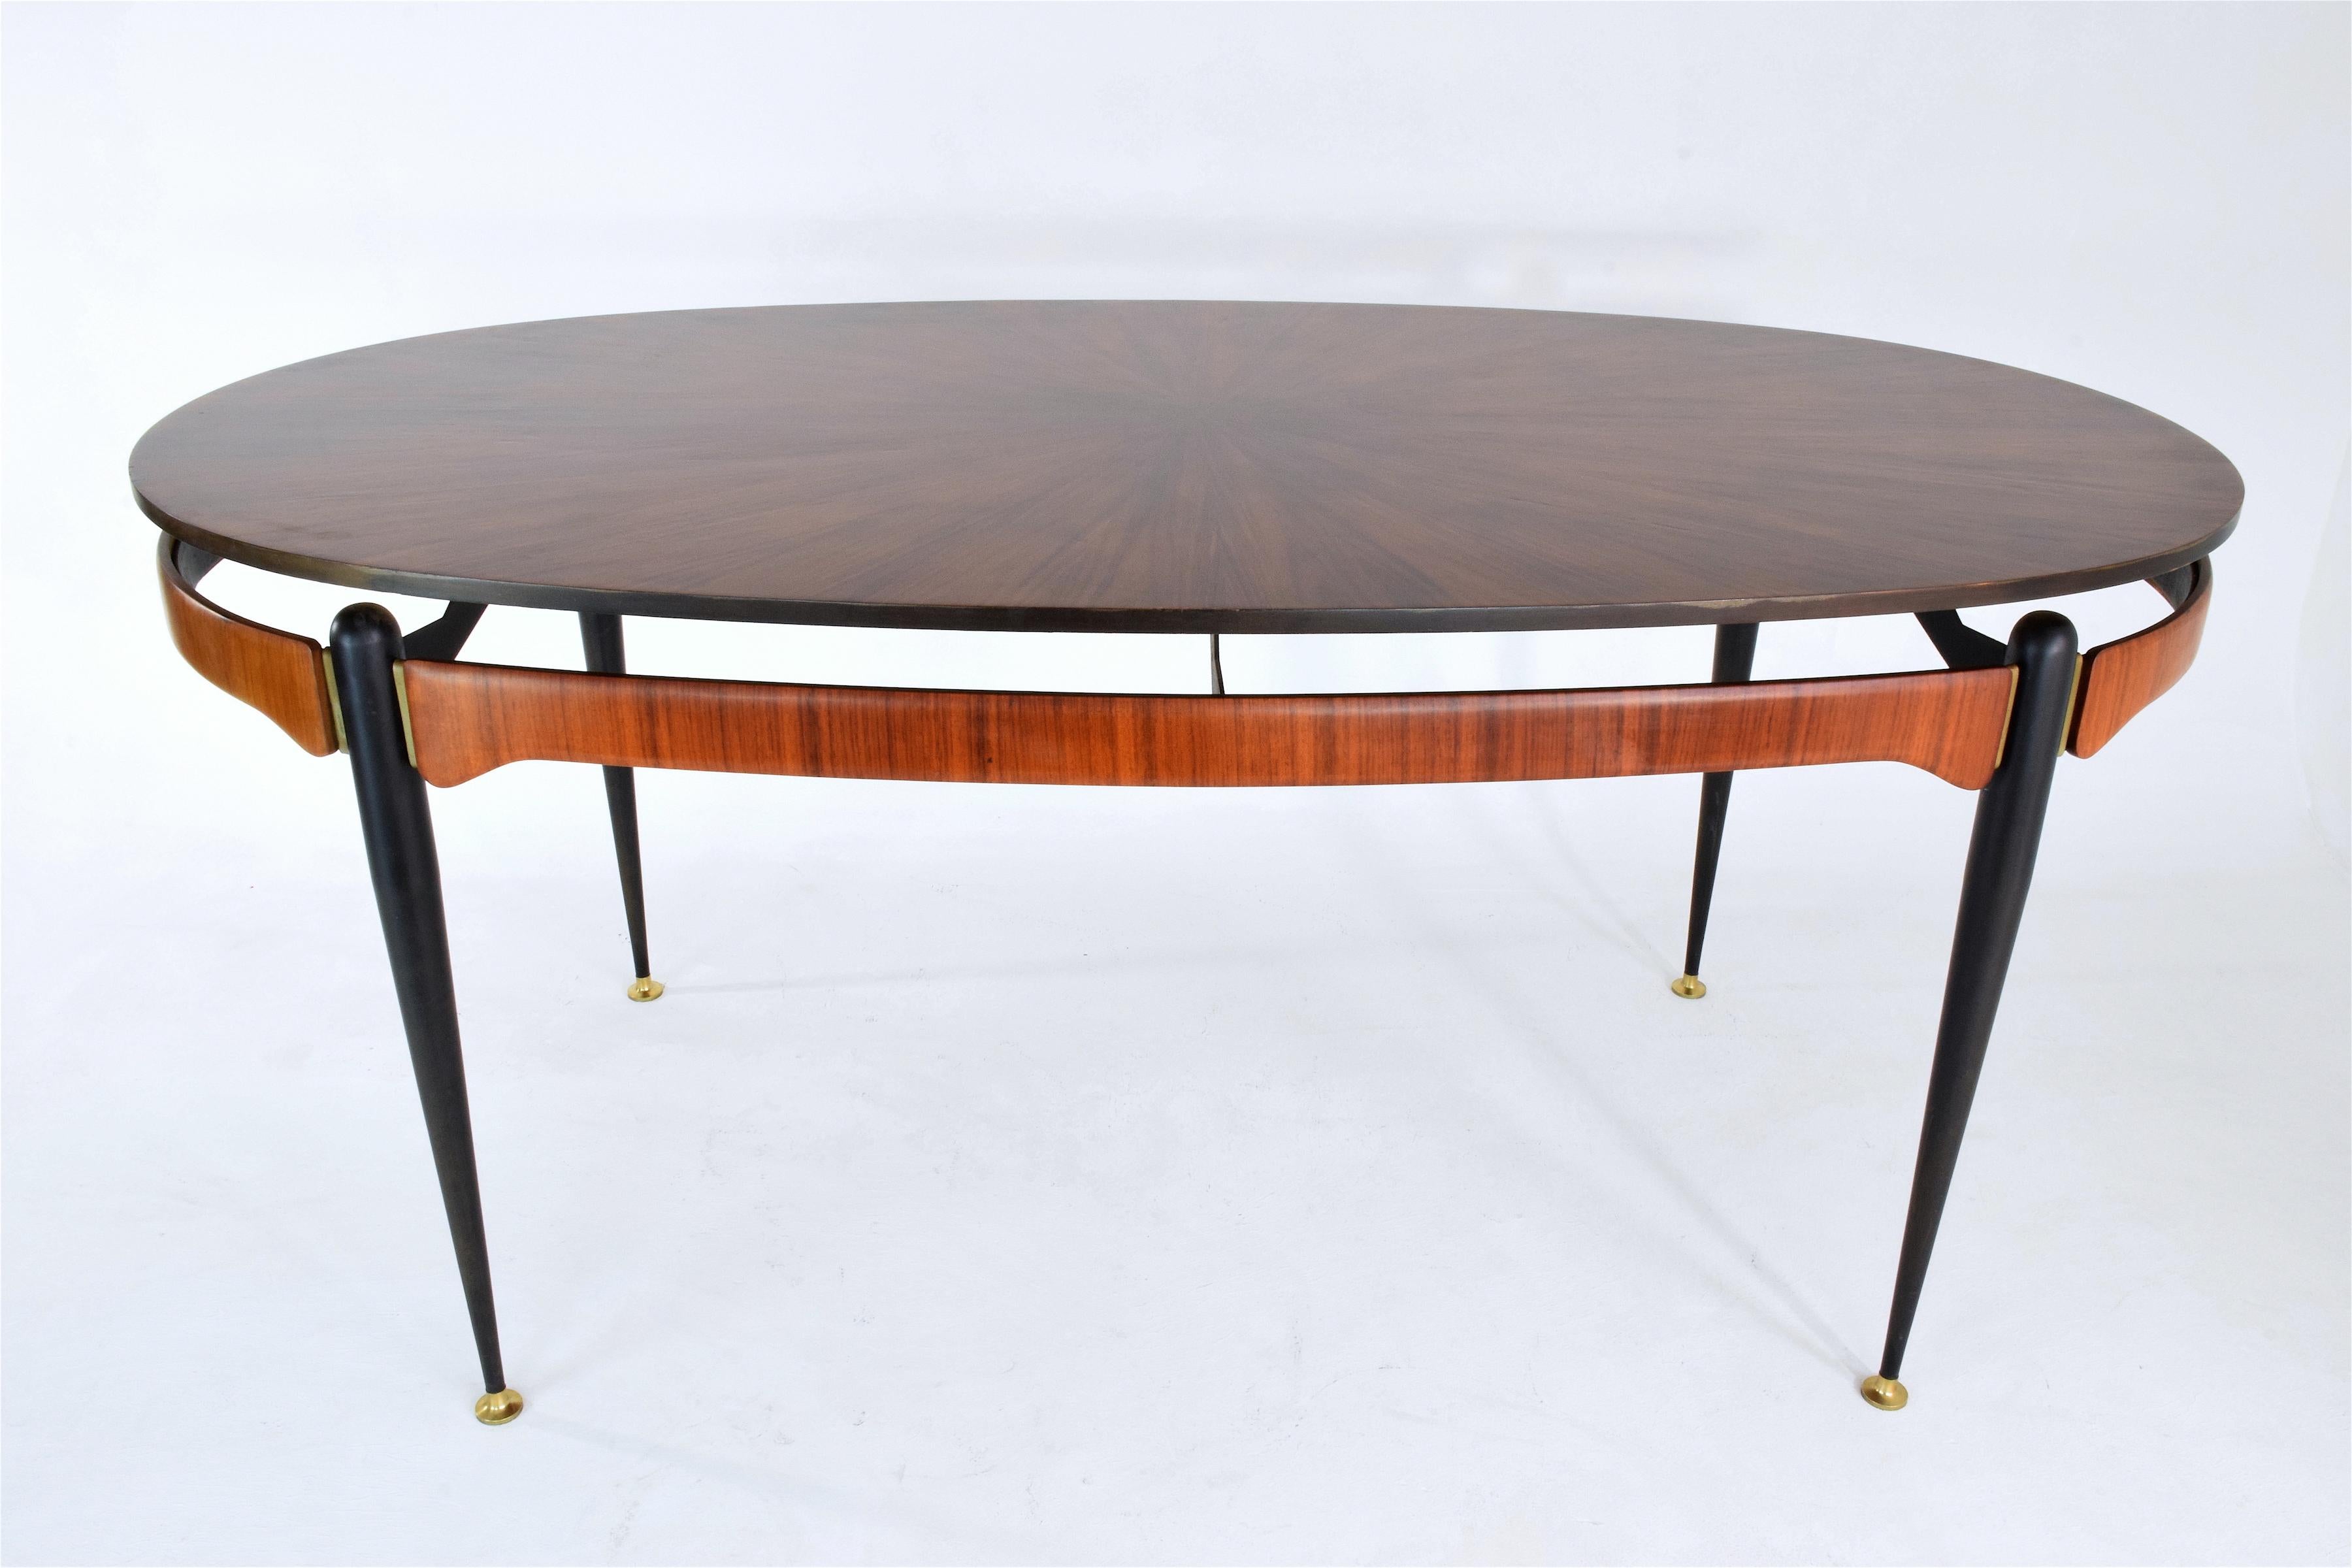 A beautiful collectible Italian vintage 6 seater oval wood dining table of striking design in teak veneer, tapered legs composed of black lacquered steel and adorned with brass endings, 
Italy, circa 1950s.
 ----
All our pieces are fully restored at